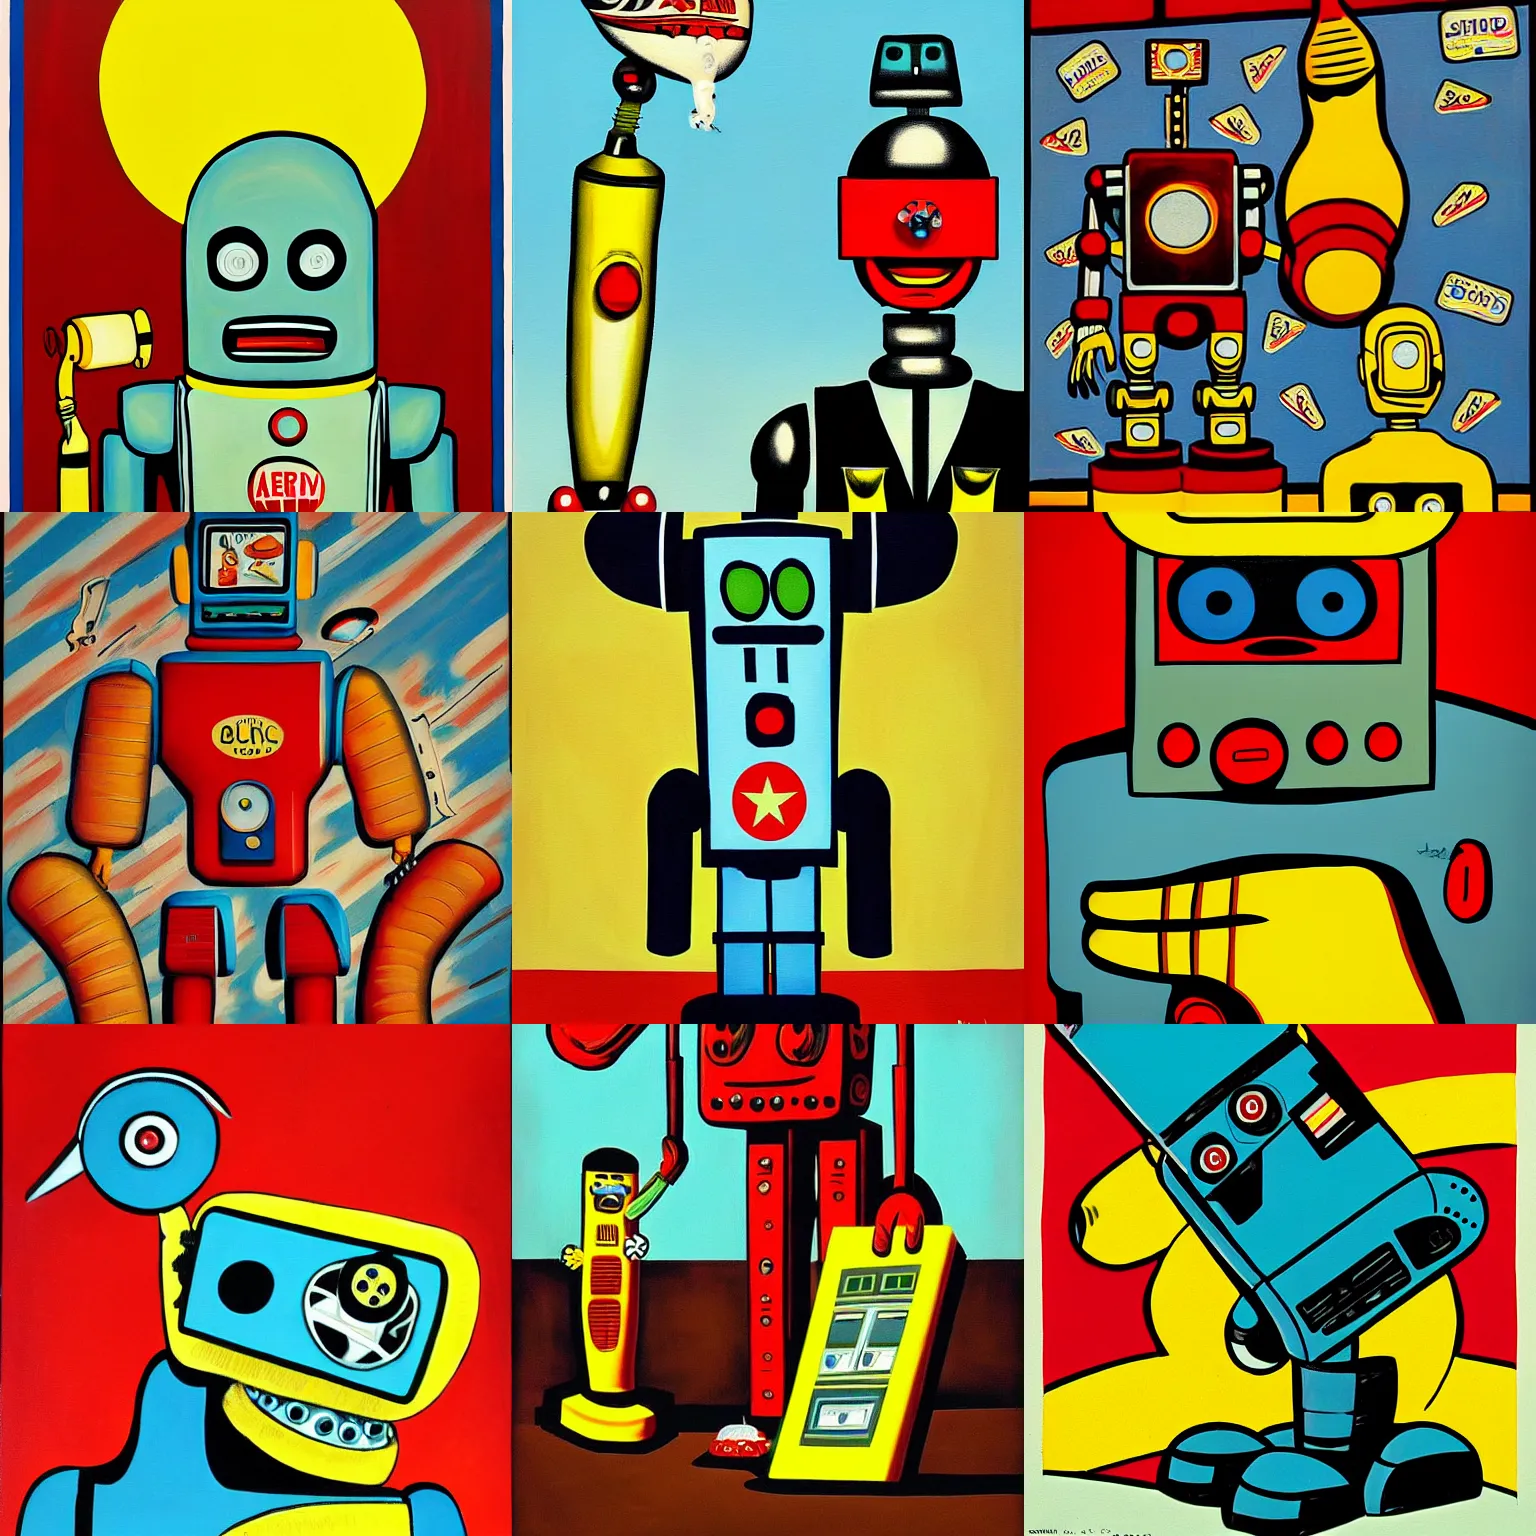 Prompt: a painting of a robot that is in the air, slip on a banana, a pop art painting by art spiegelman, deviantart, pop surrealism, soviet propaganda, american propaganda, movie poster